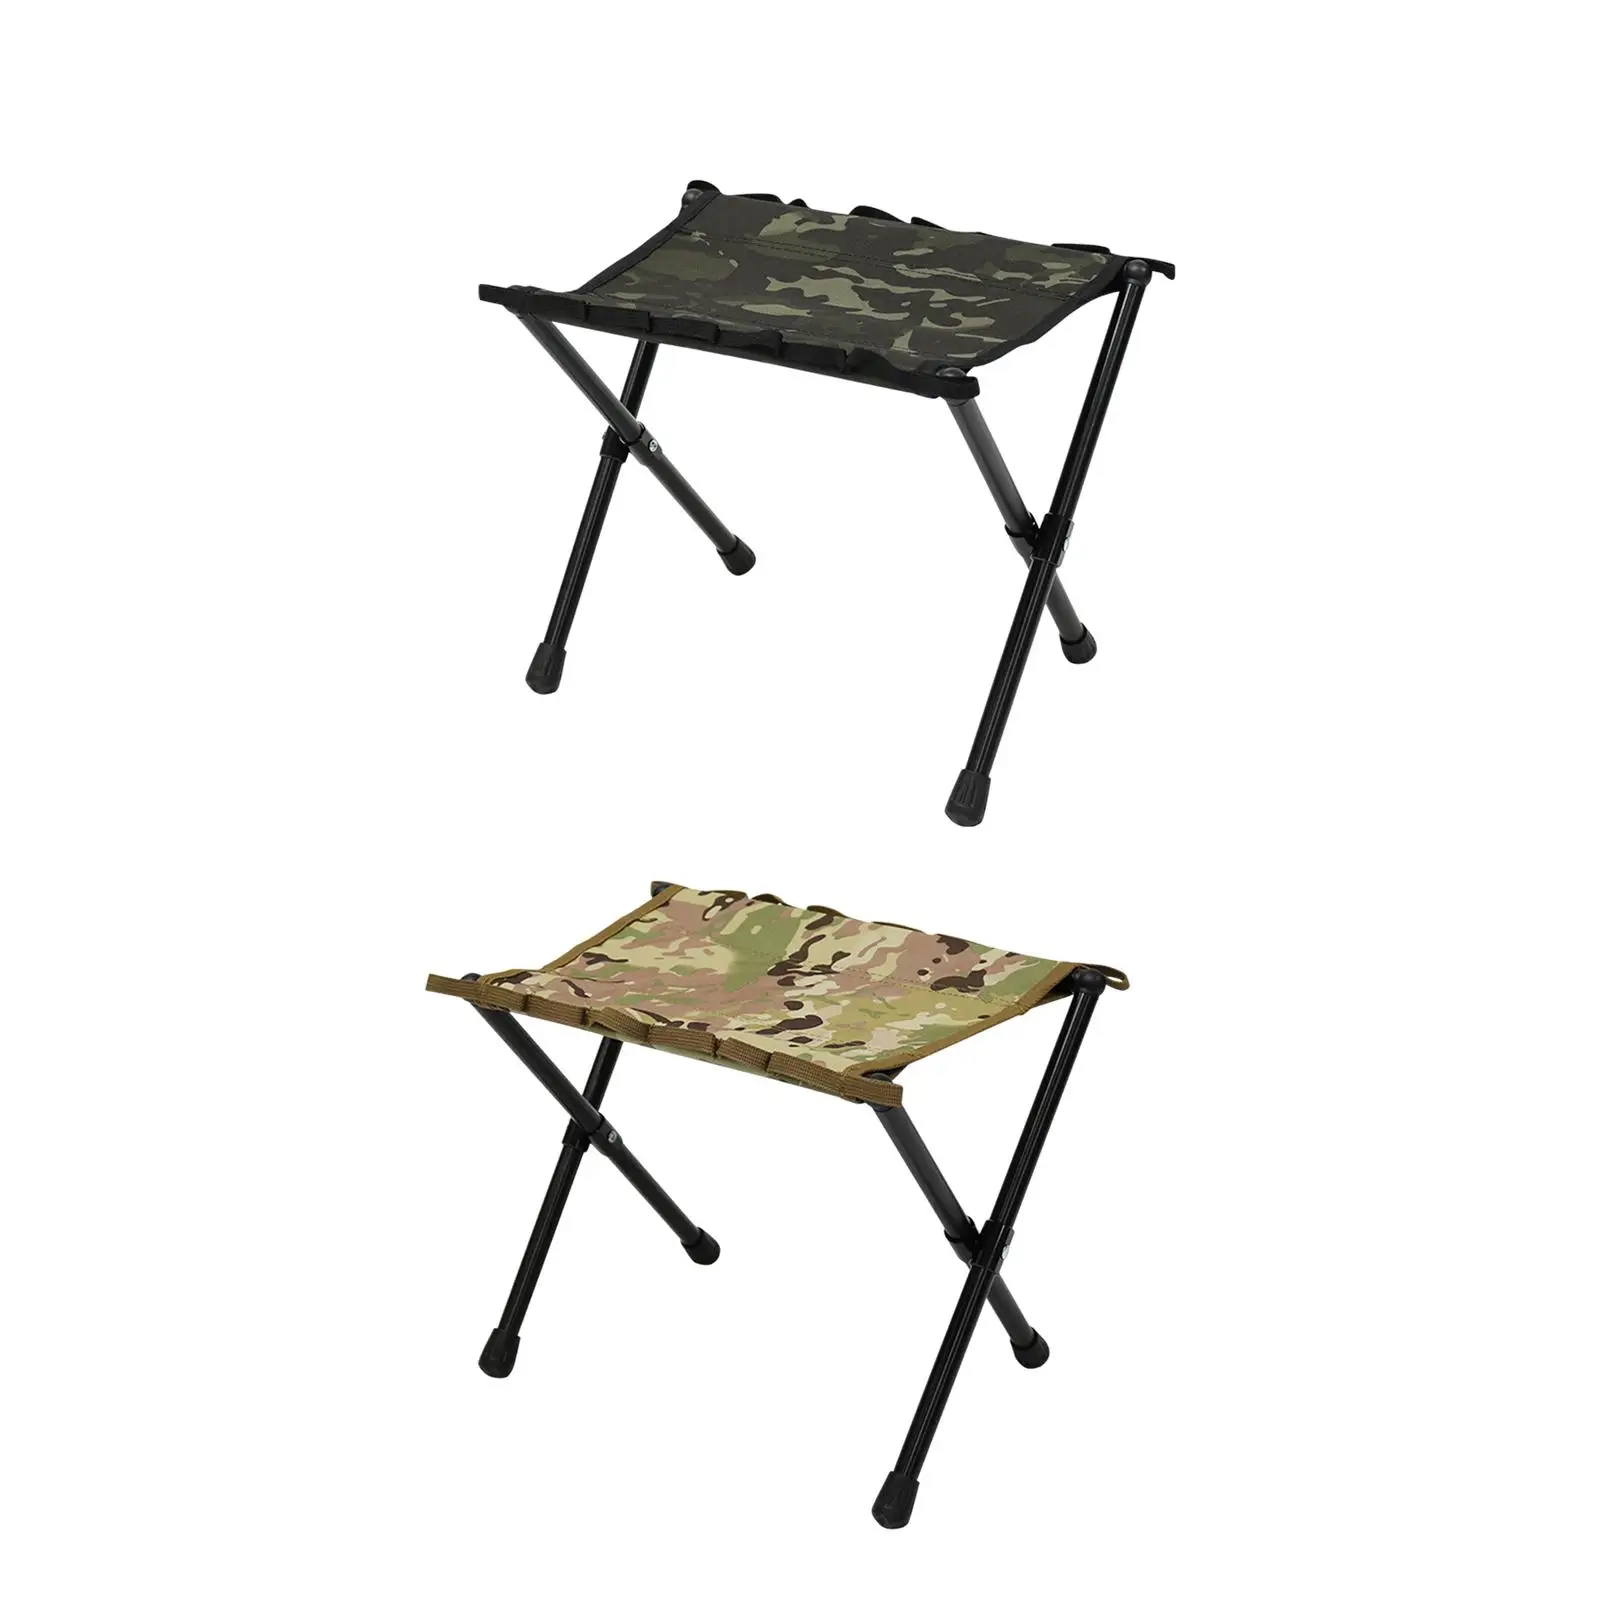 Folding Stool Camping Collapsible Foot Rest Picnic Chairs Lightweight Saddle Chair for Backpacking Beach Walking BBQ Festival